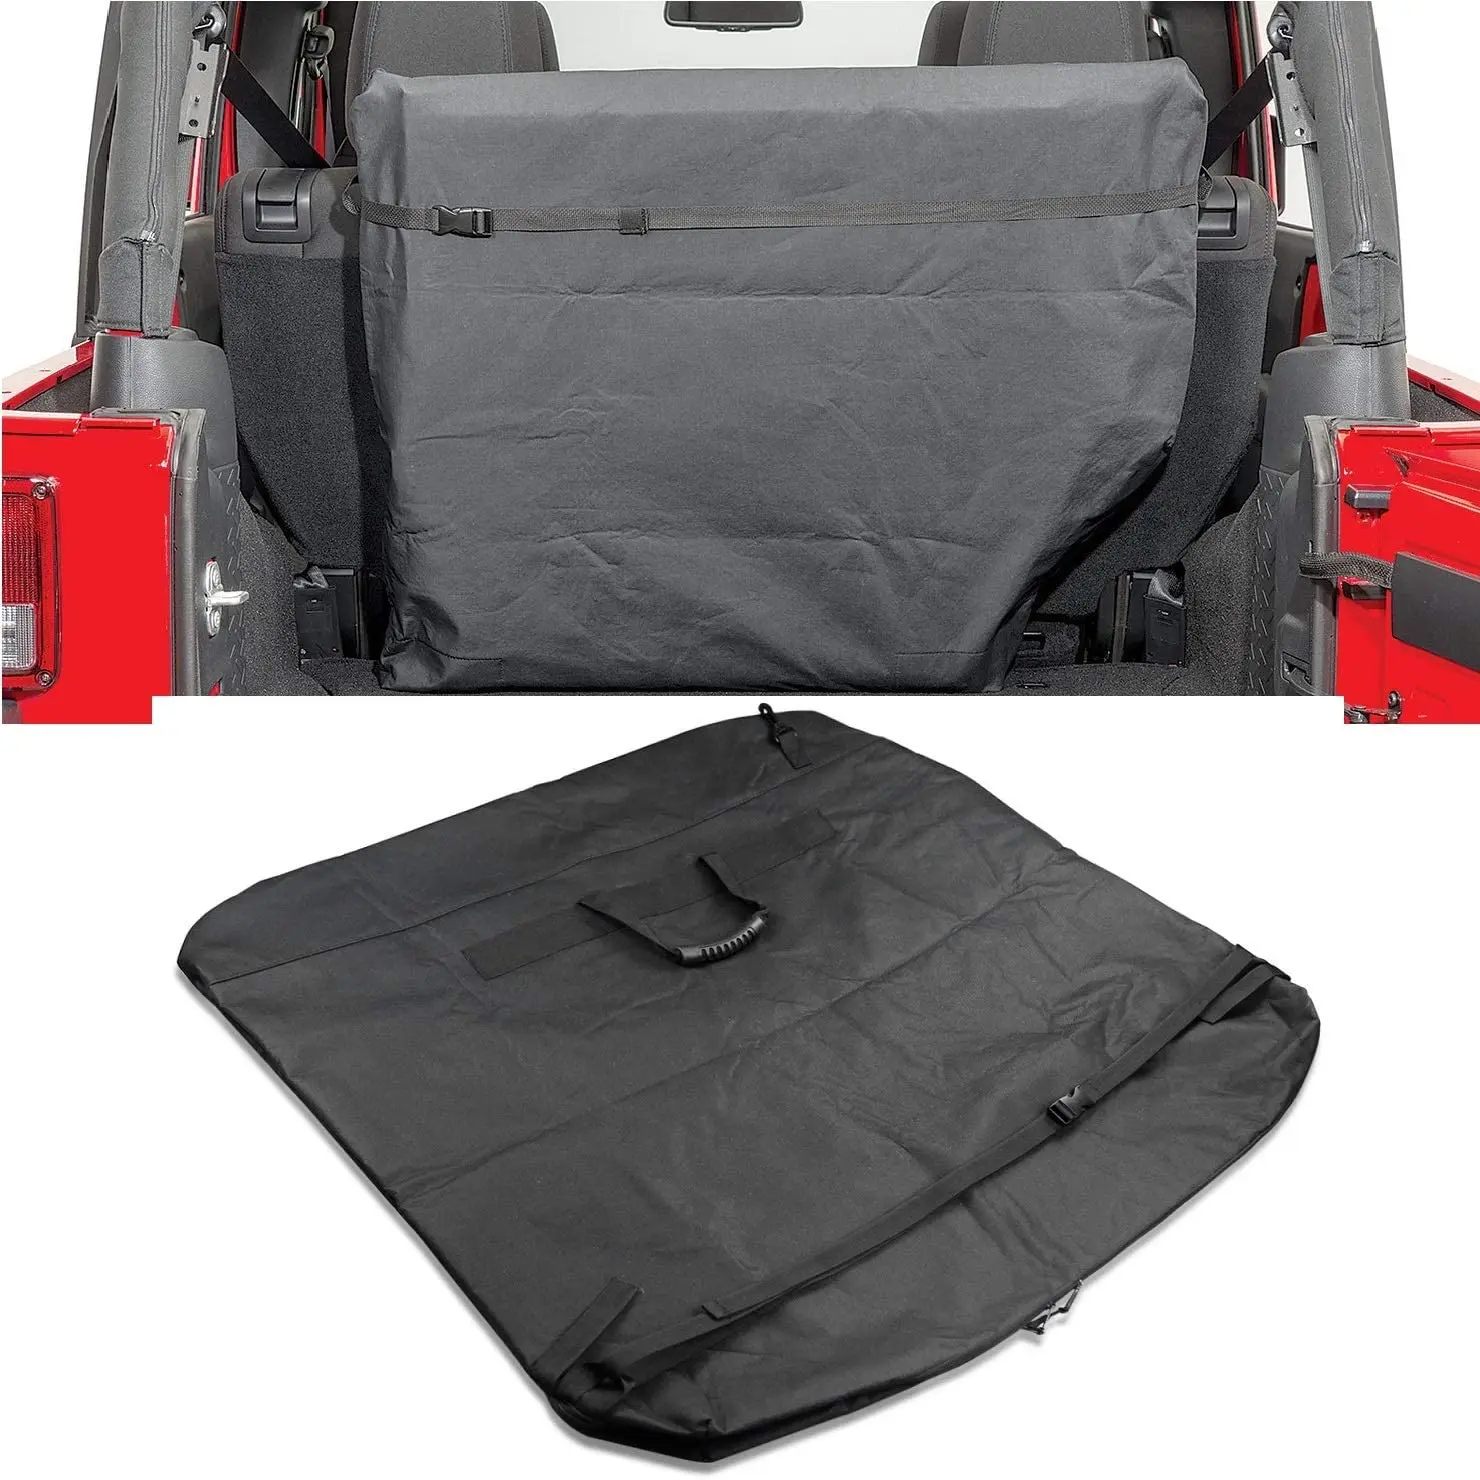 Fit For Jeep Wrangler Jk Jku Tj Jl Freedom Top Panels Storage Bag Black  Carrying Case Cage With Grab Handle - Buy Freedom Panel Hard Top Storage Bag  With Handle For Jeep